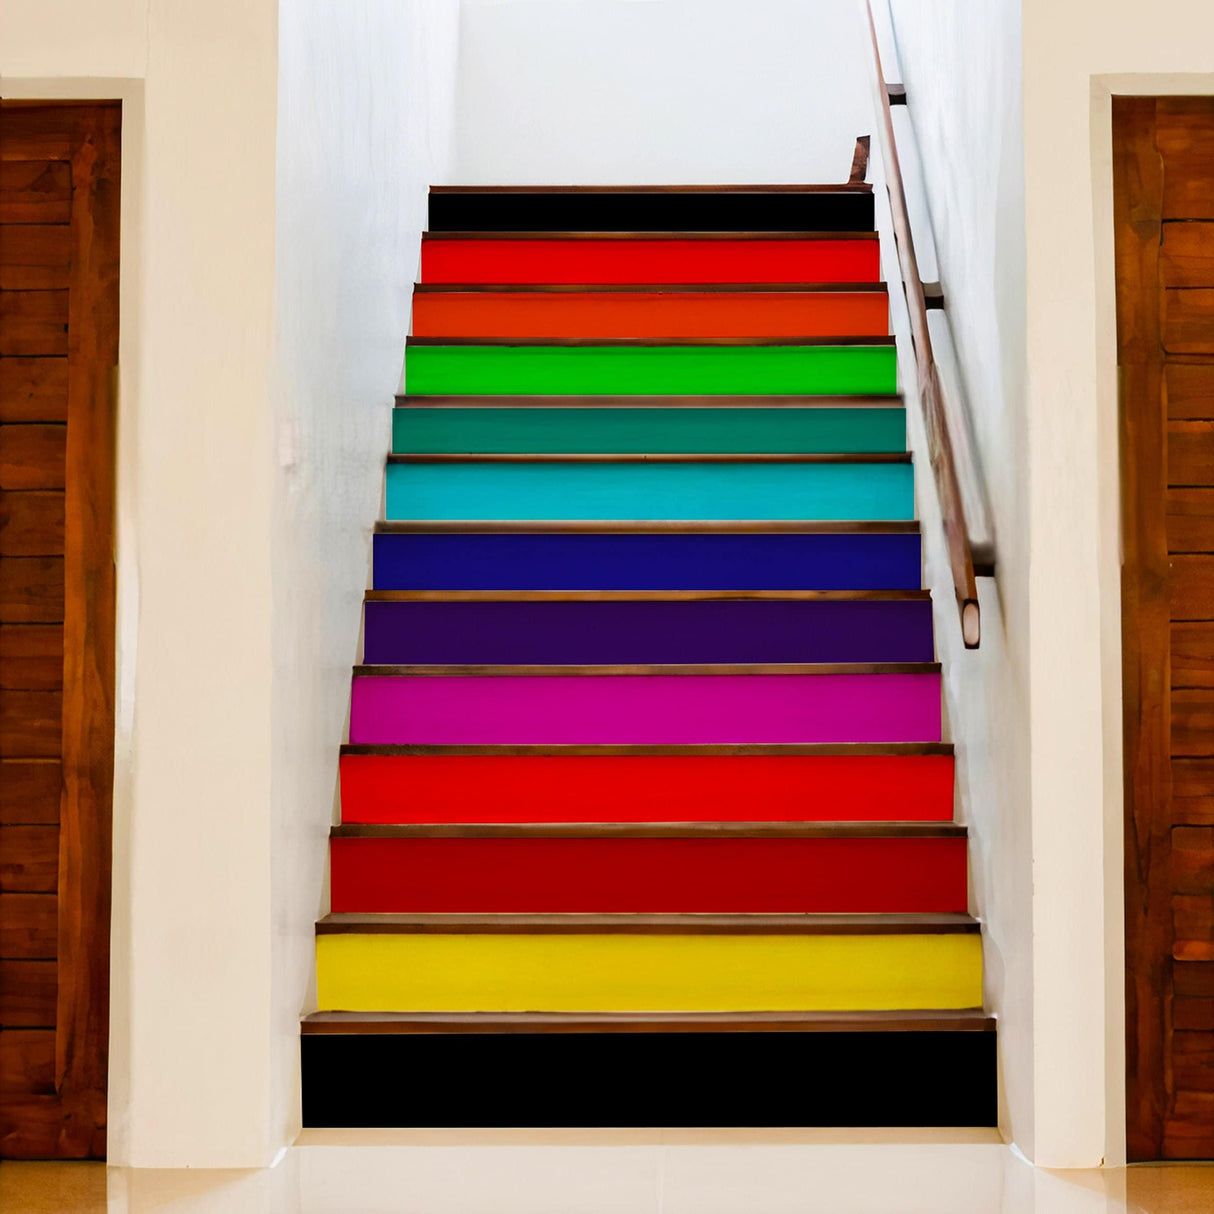 Rainbow Stairs Multicolor Stair Panels Self Adhesive Stairs Risers